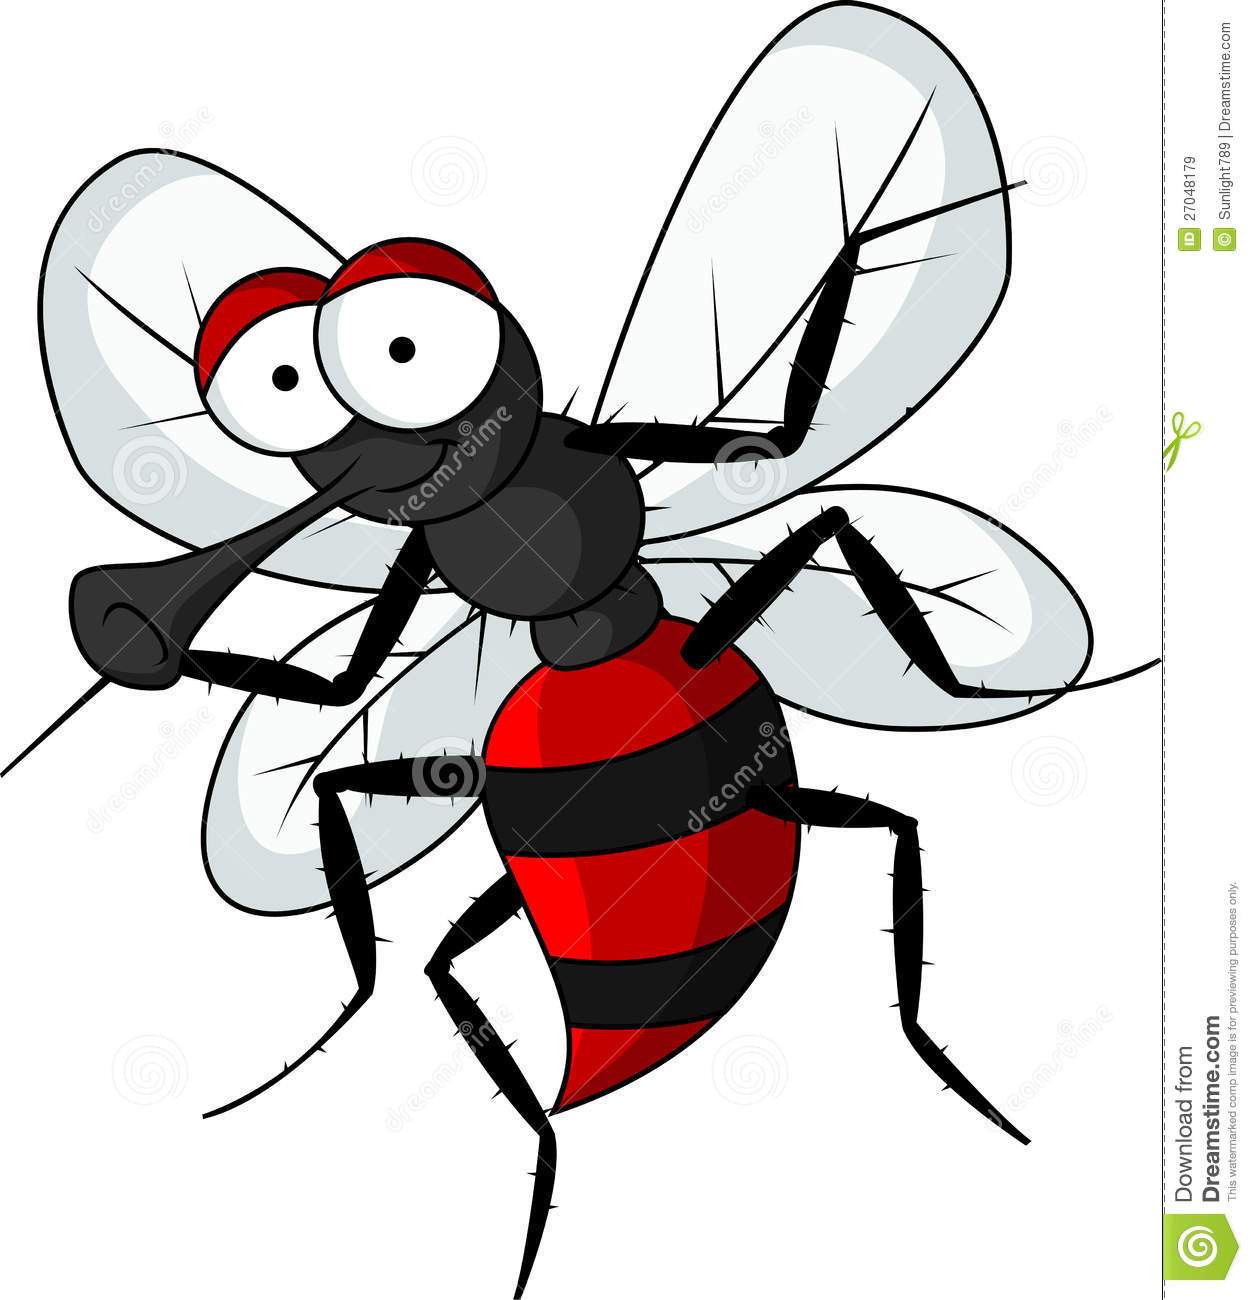 Funny Mosquito Cartoon Royalty Free Stock Images   Image  27048179